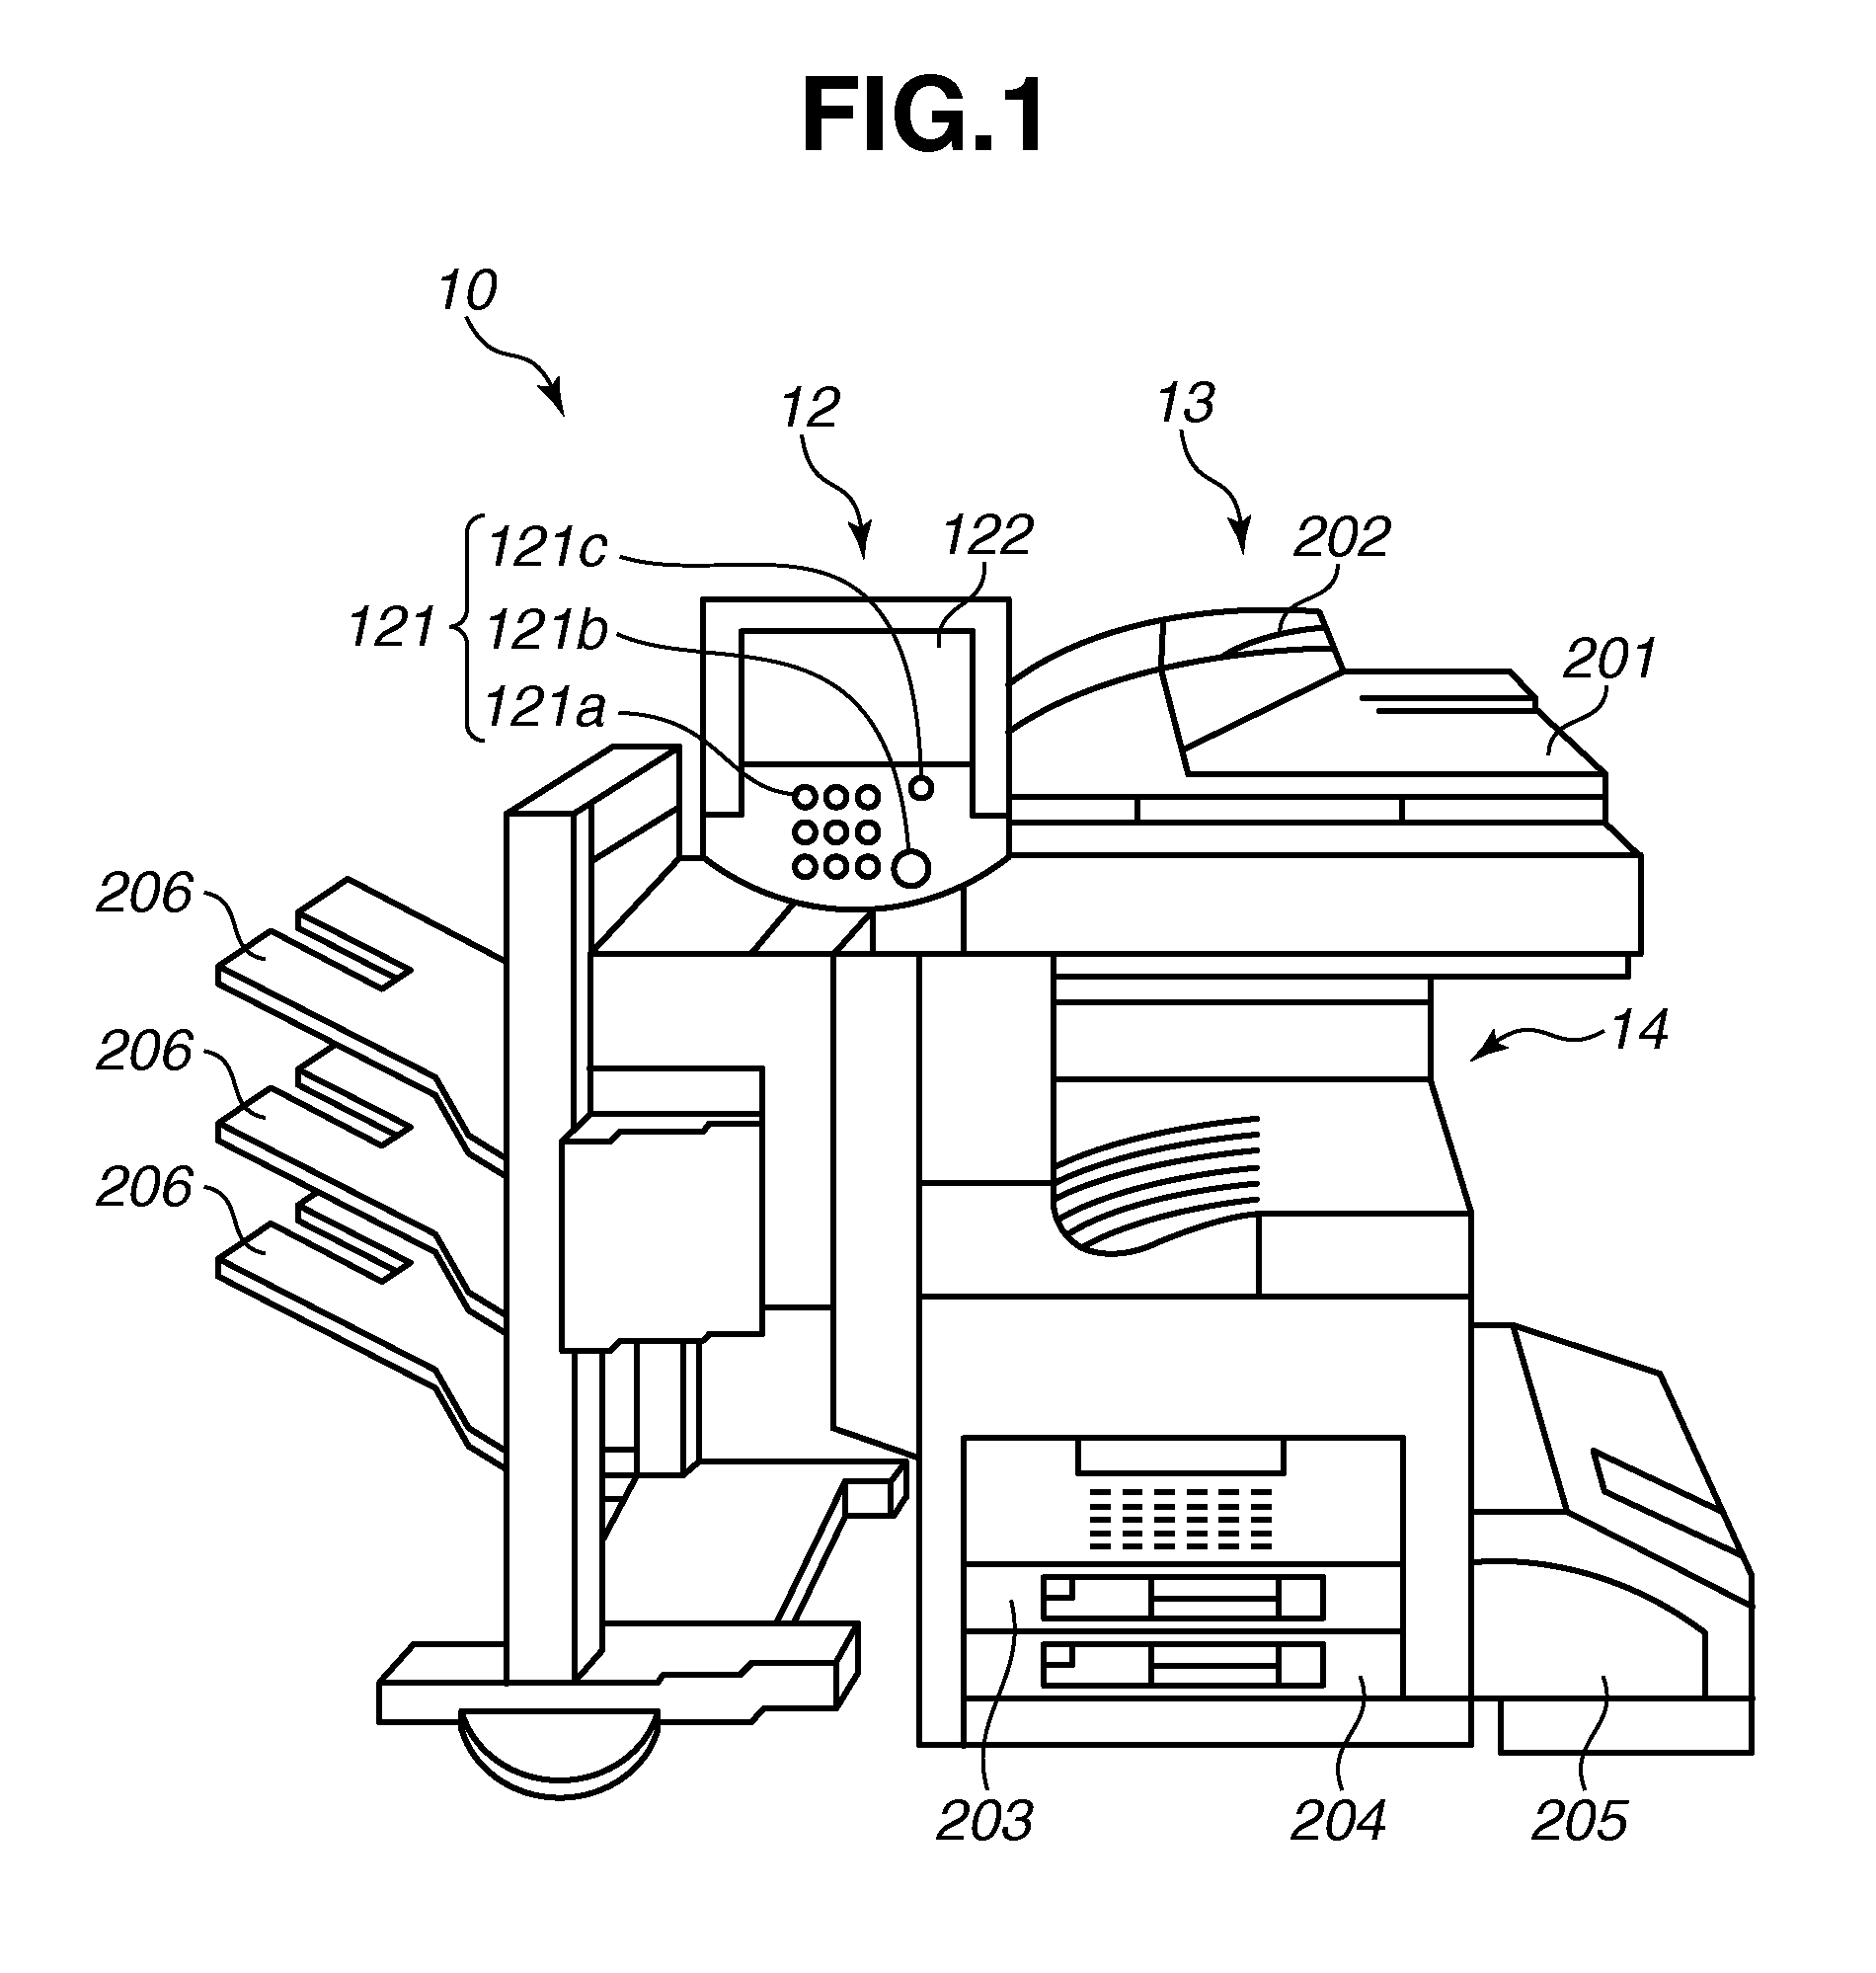 Image forming apparatus configured to switch between supplying and shutting-off of power to a portion of the image forming apparatus